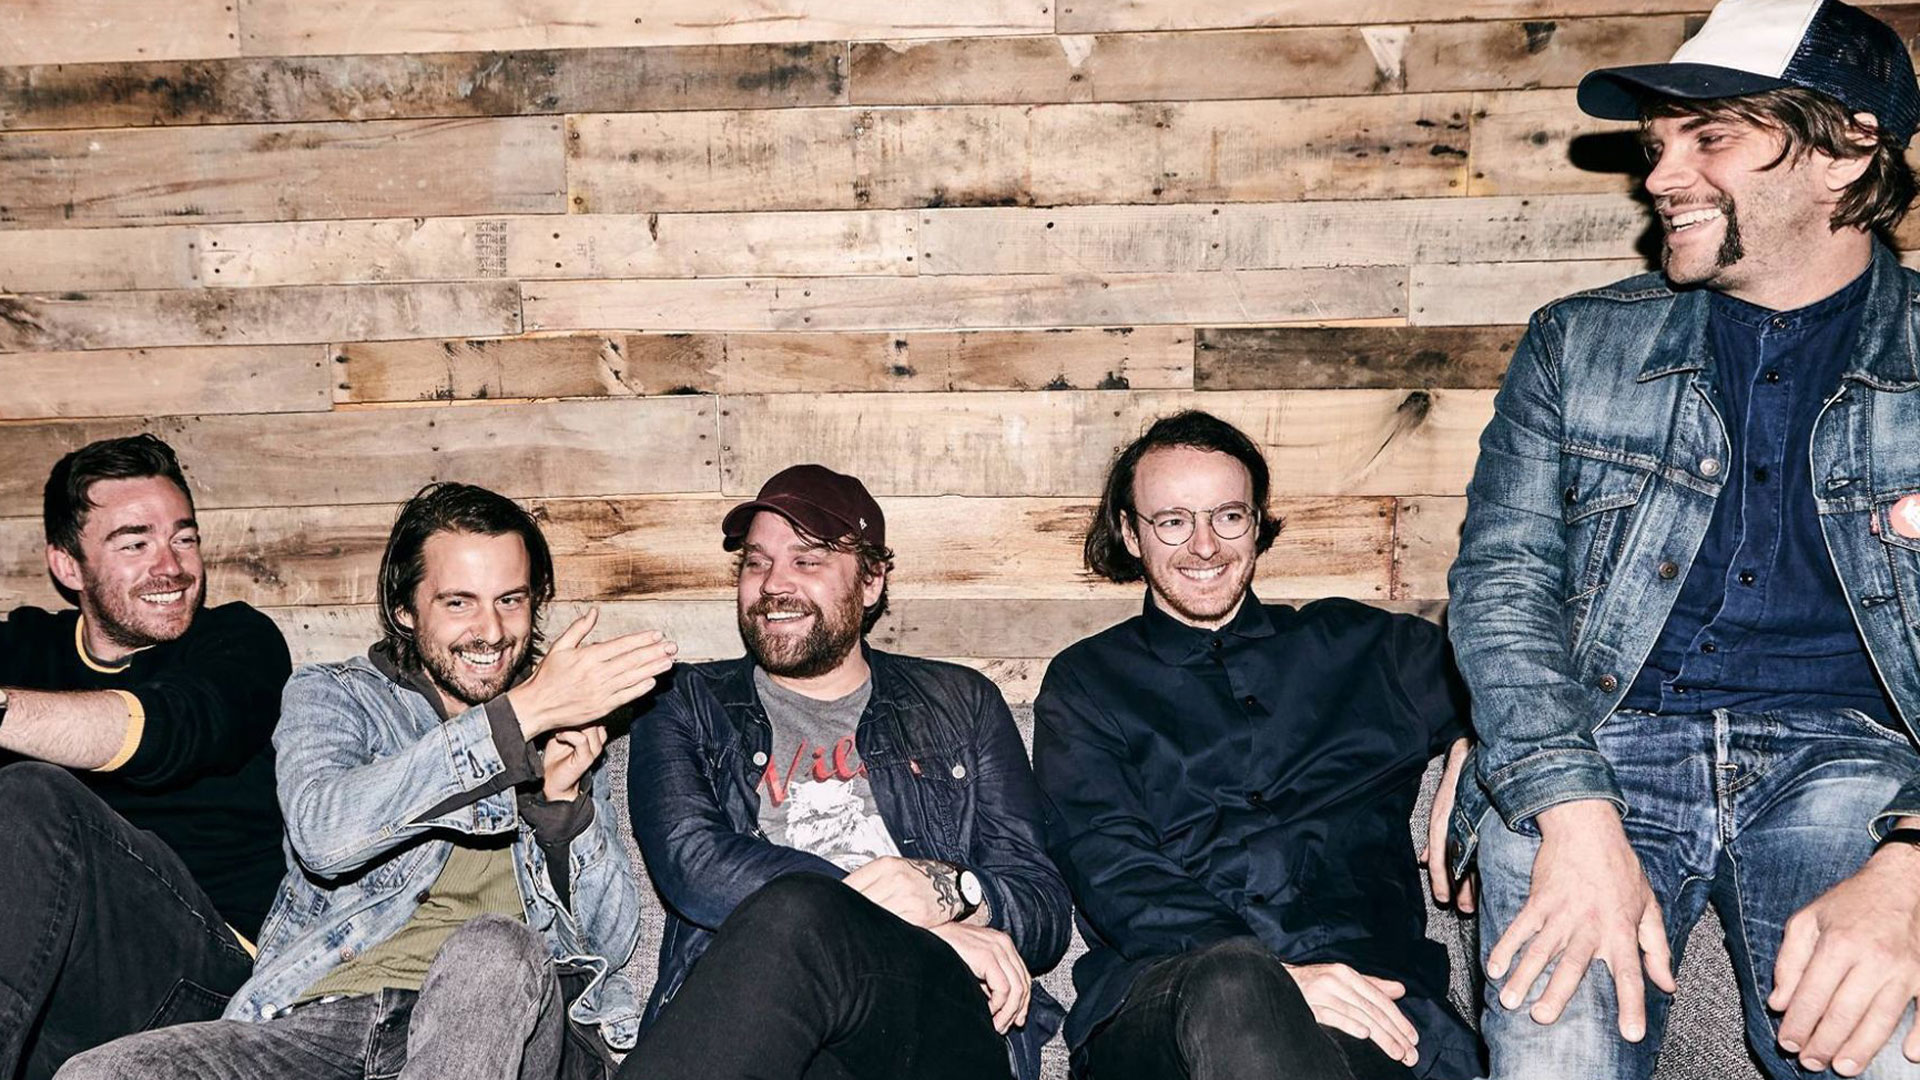 Tiny Changes continues the legacy of Frightened Rabbit frontman Scott Hutchison